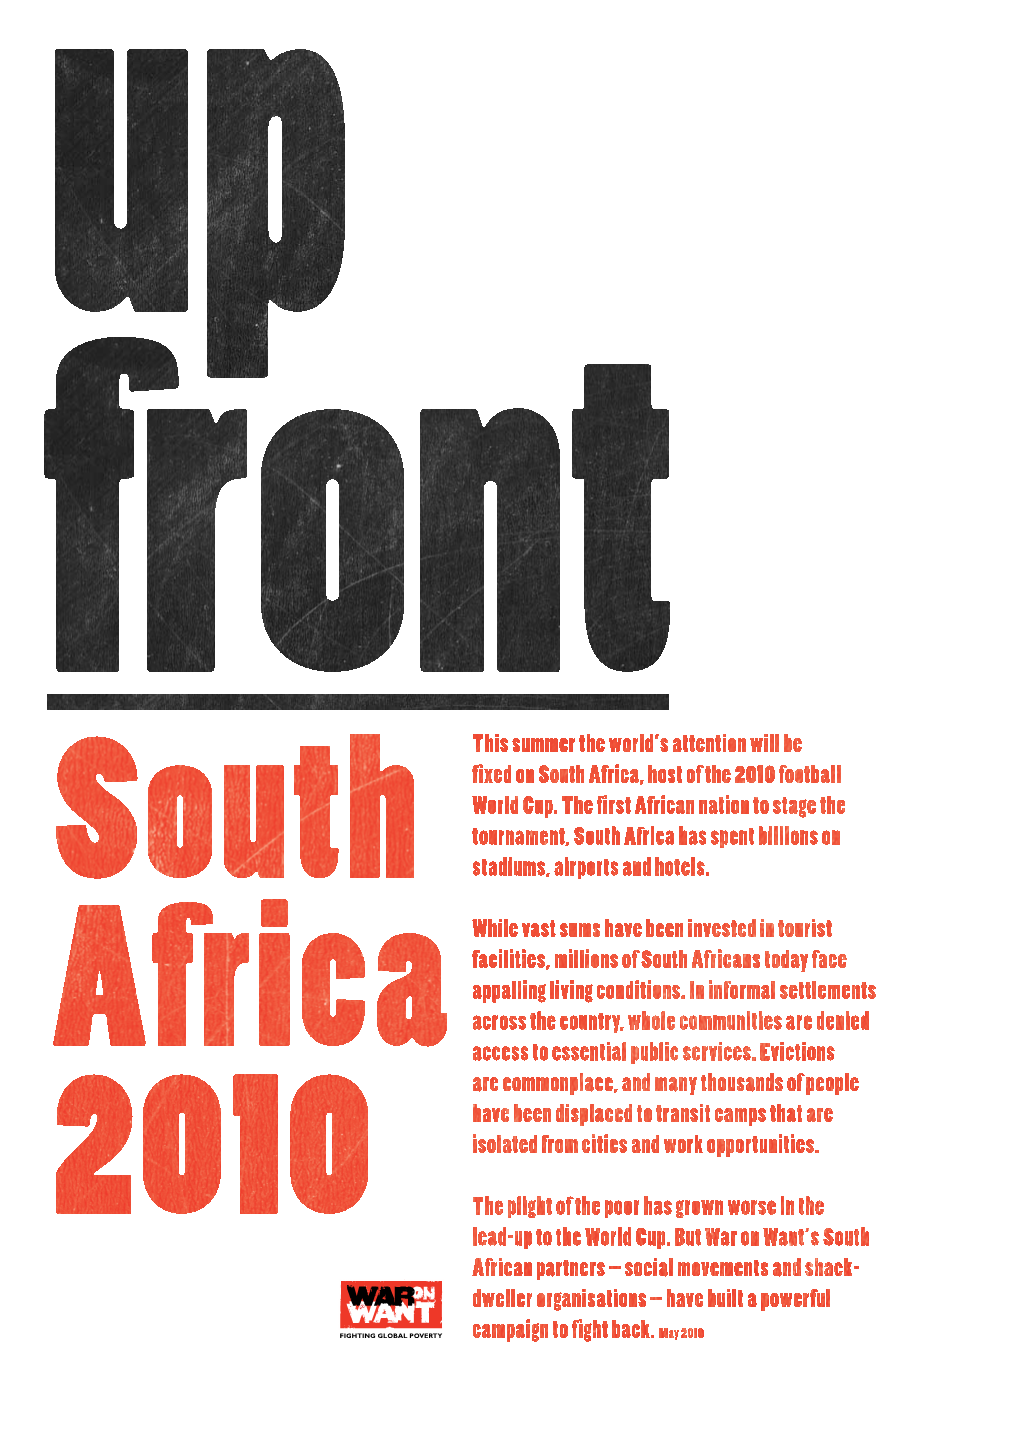 Up Front -- South Africa 2010.Pdf